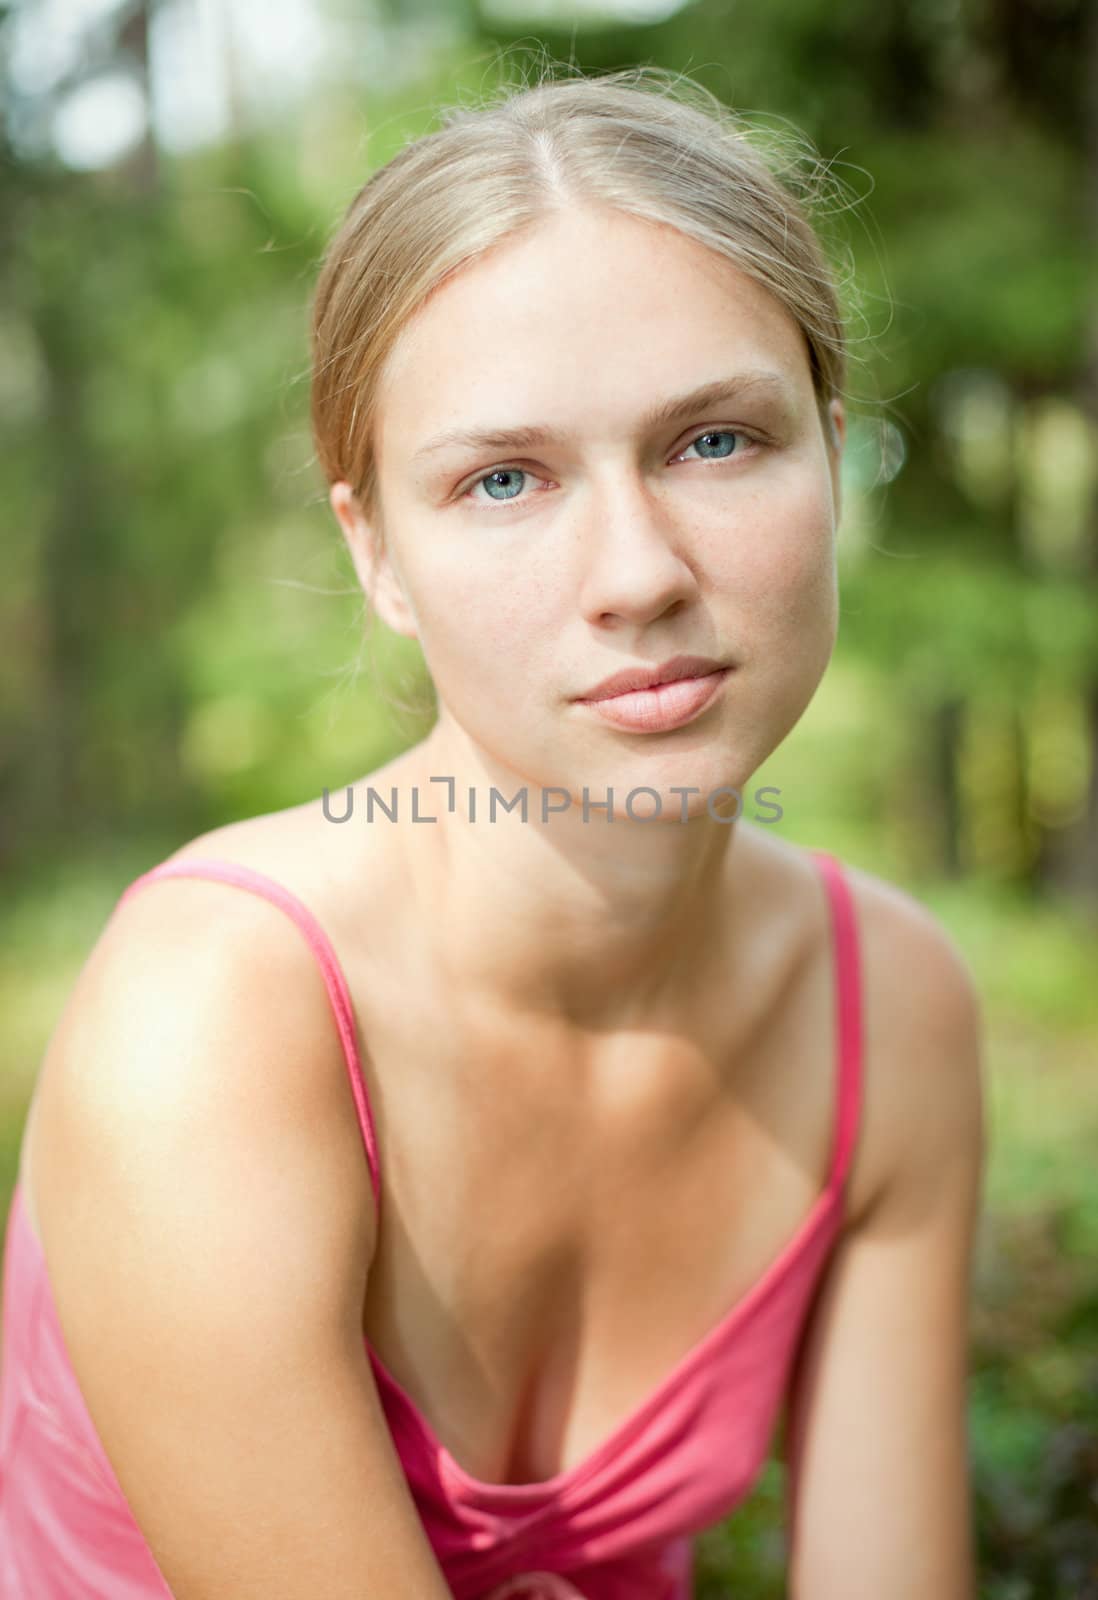 Portrait of a young woman by naumoid